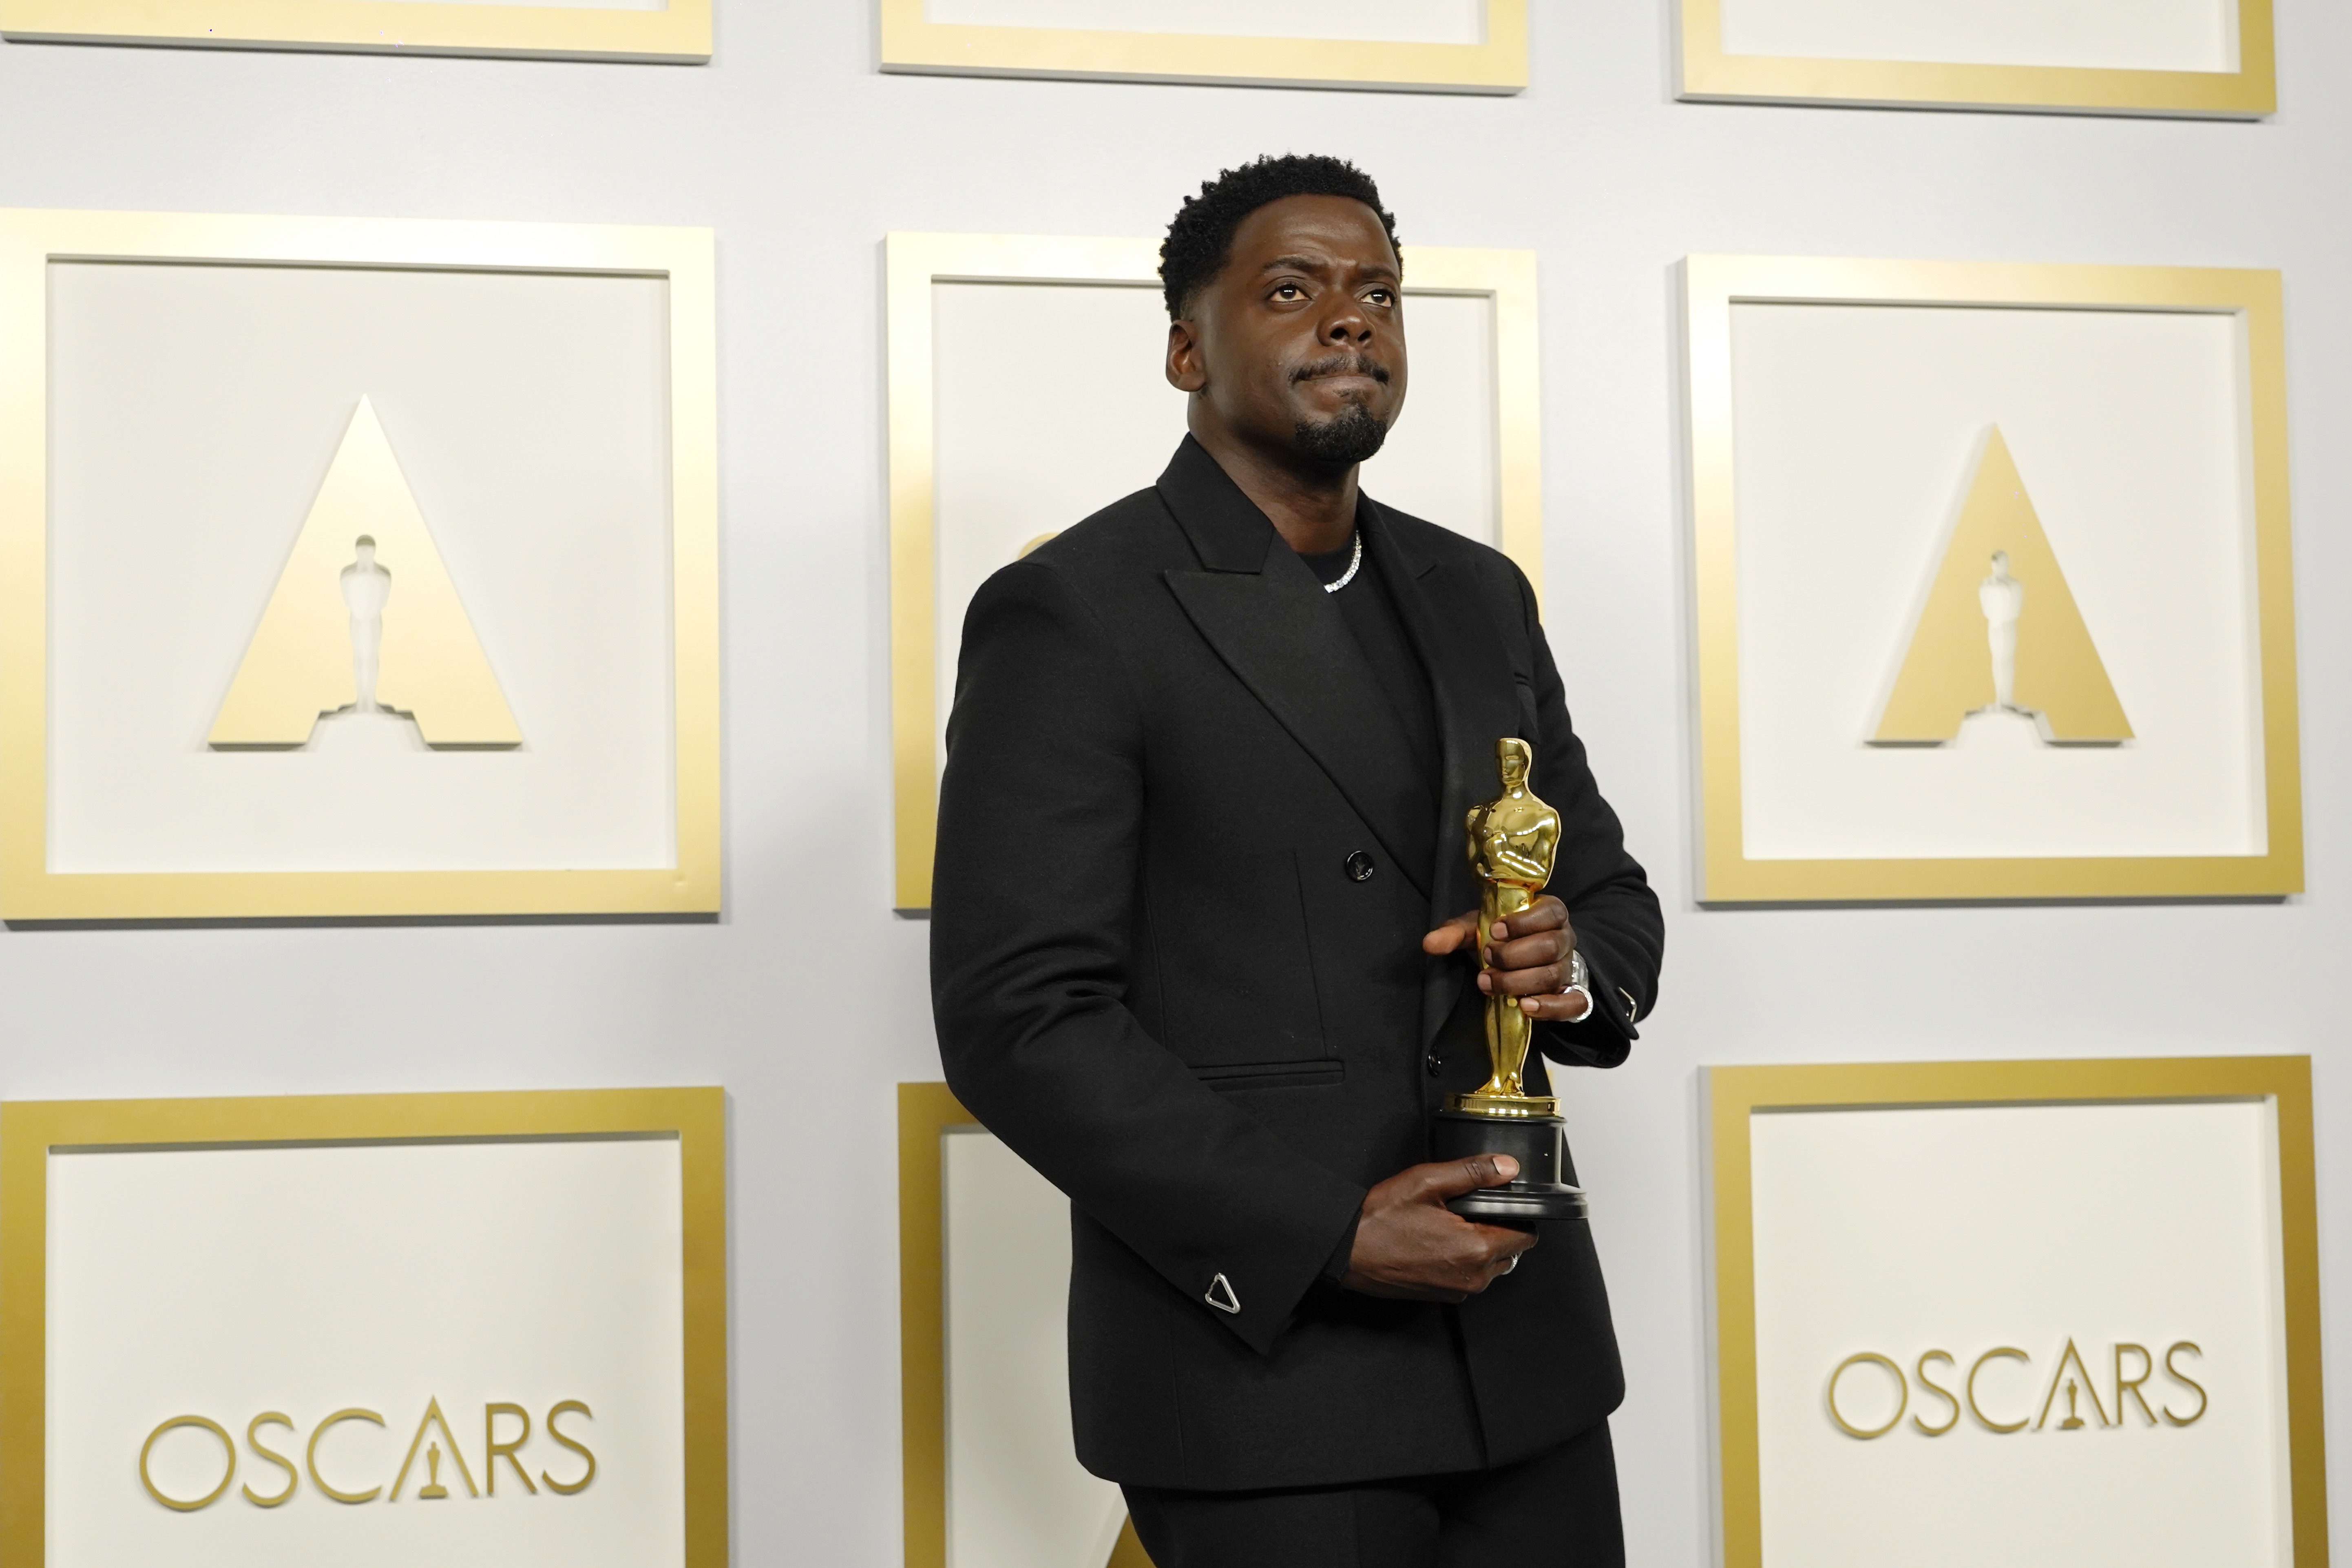 Daniel Kaluuya, winner of Actor in a Supporting Role for "Judas and the Black Messiah", poses in the press room during the 93rd Annual Academy Awards at Union Station on April 25, 2021 in Los Angeles, California.